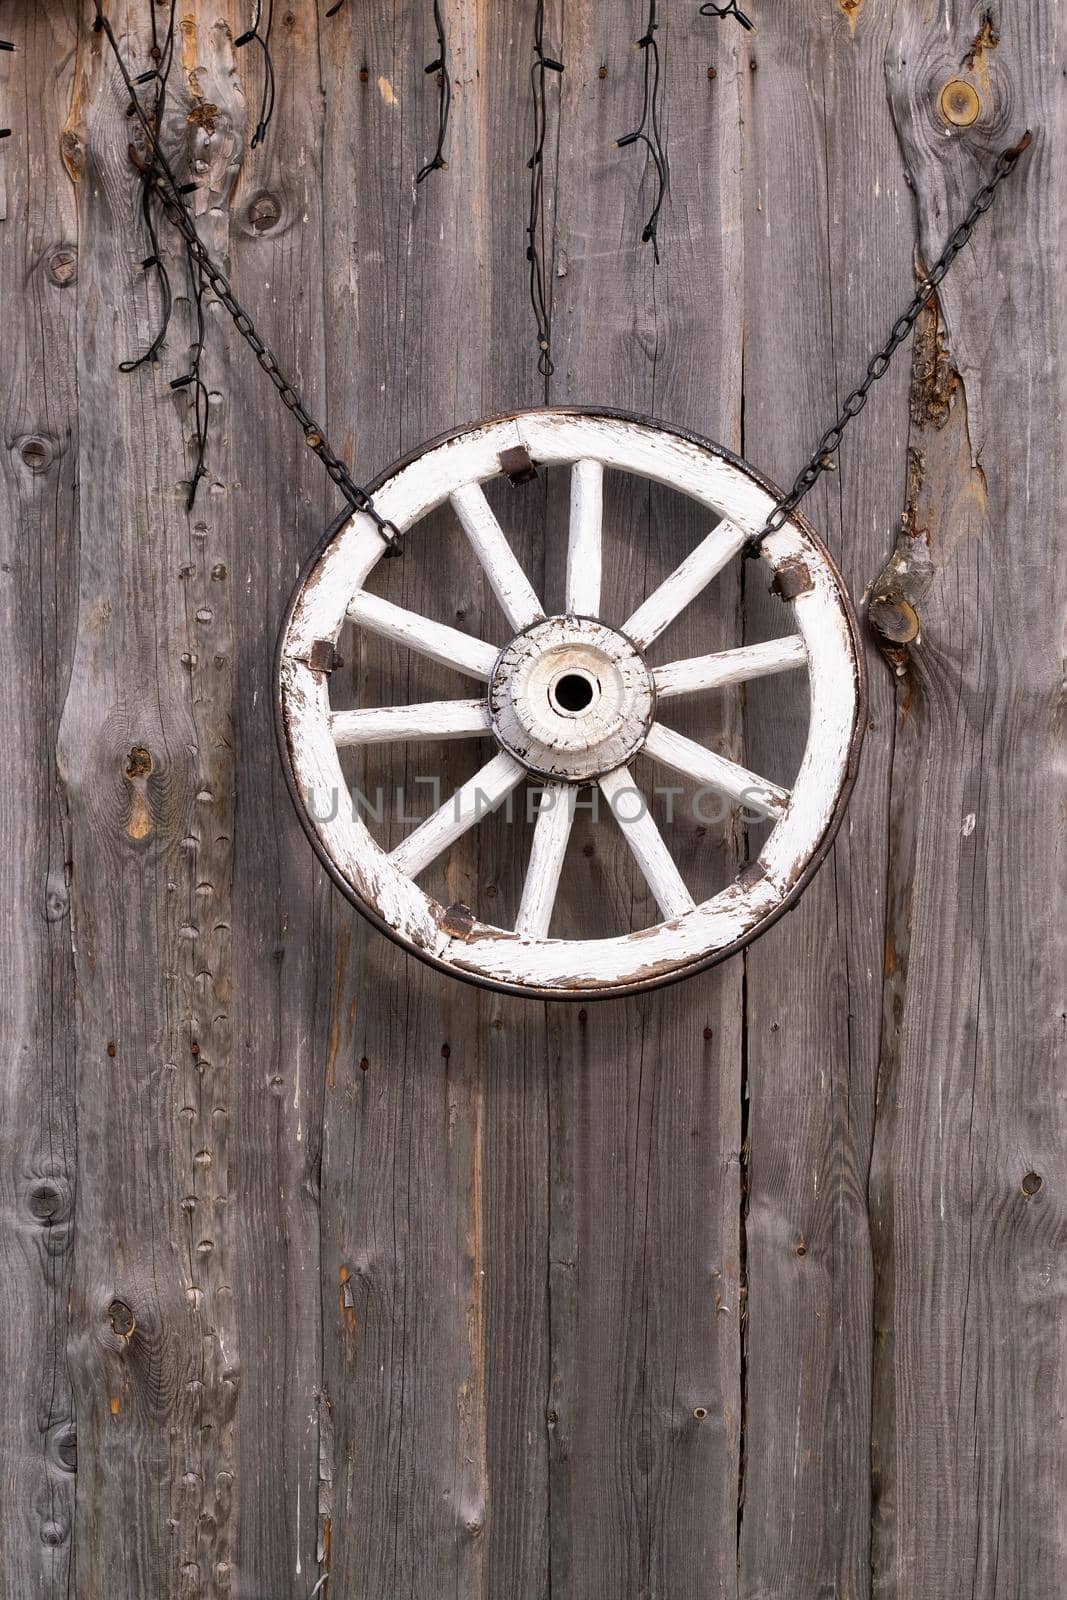 An old wooden carriage wheel hanging on the barn wall by Lobachad